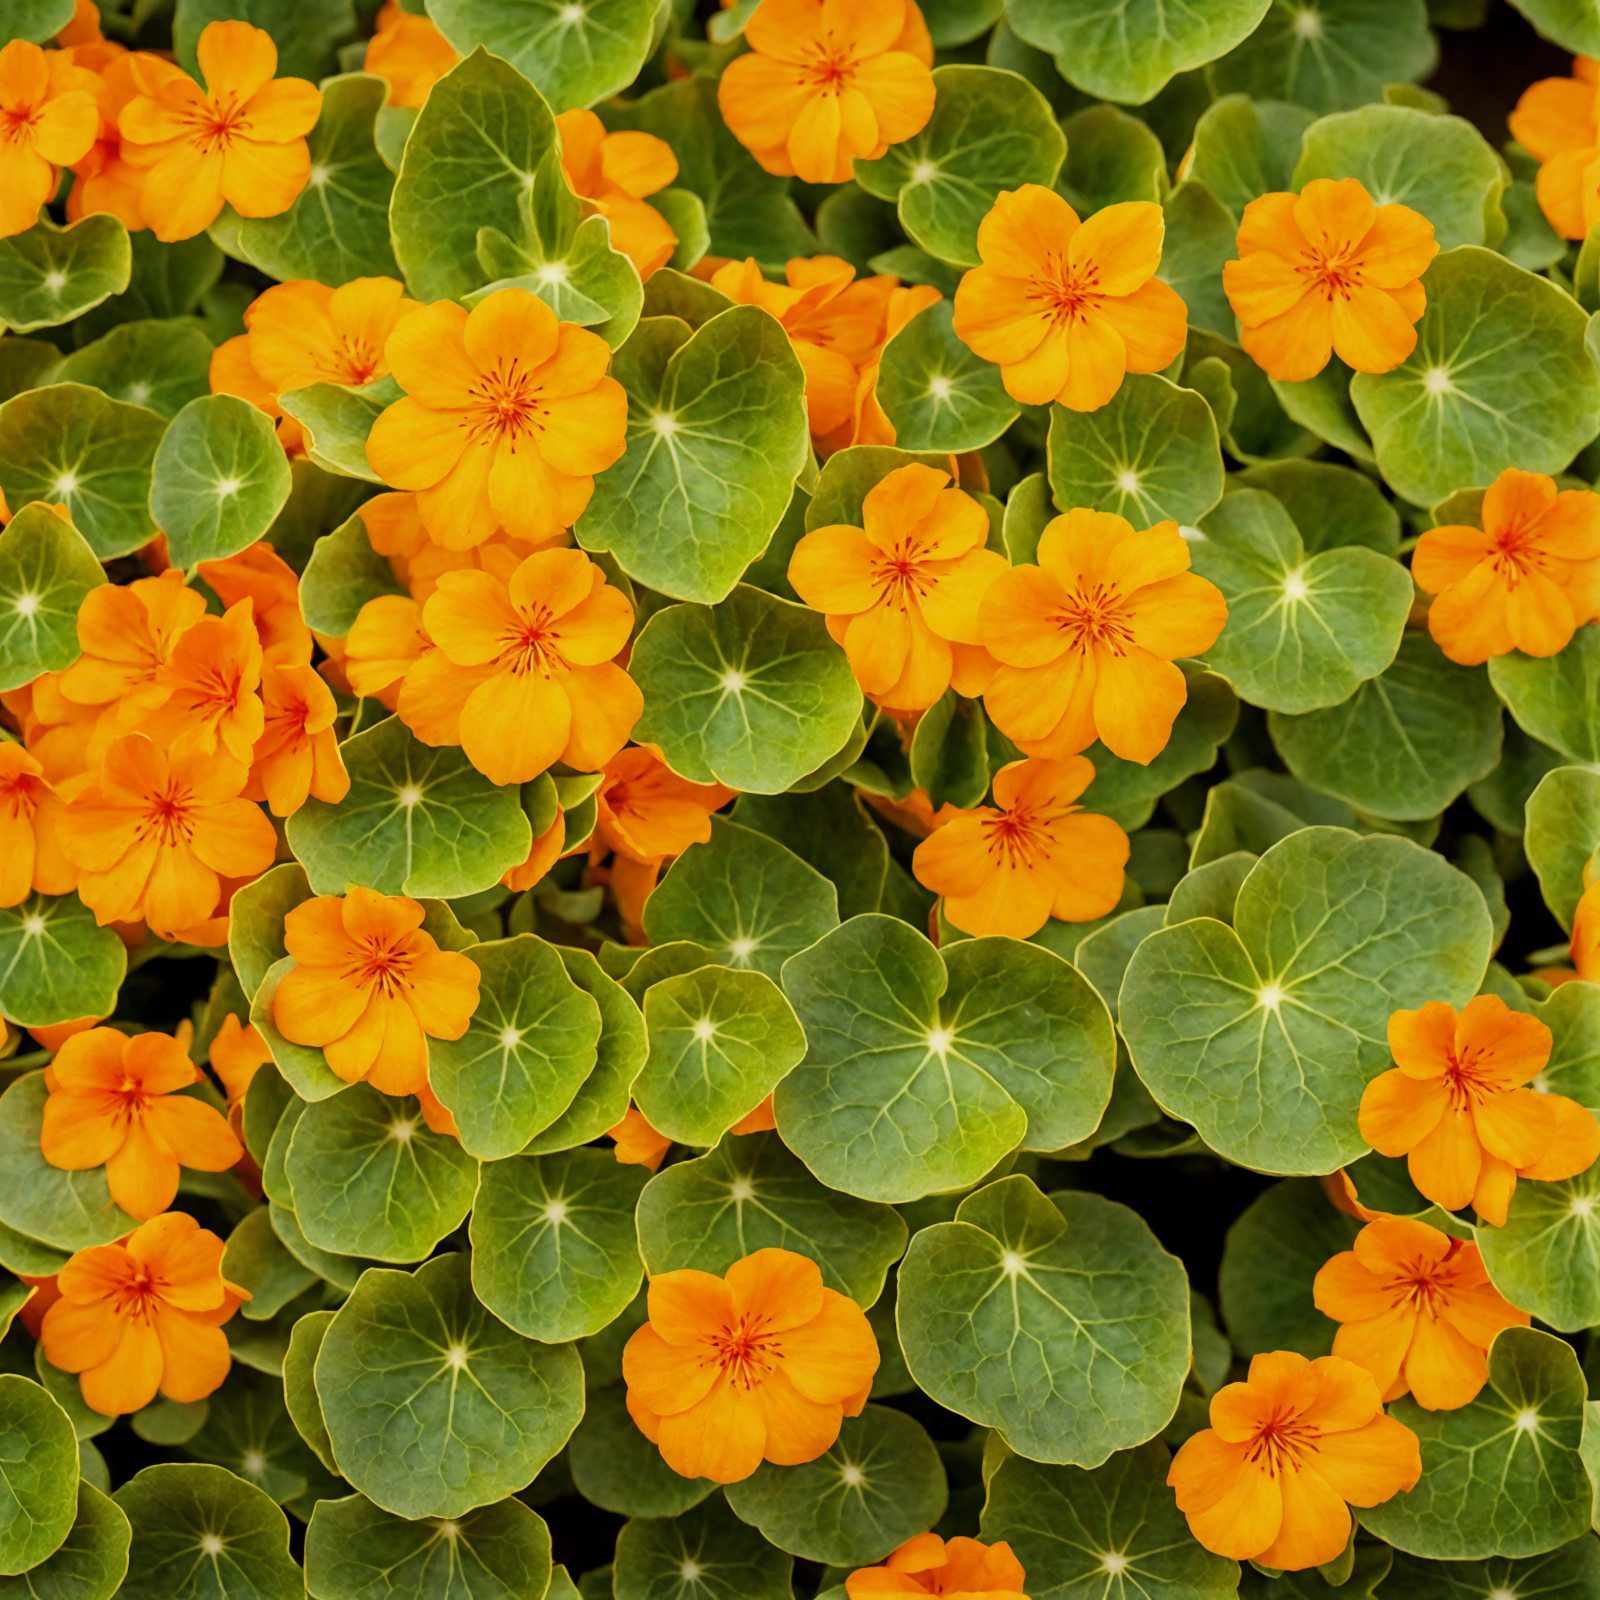 Tropaeolum majus with vibrant yellow and orange flowers in a planter, clear lighting, against a dark background.